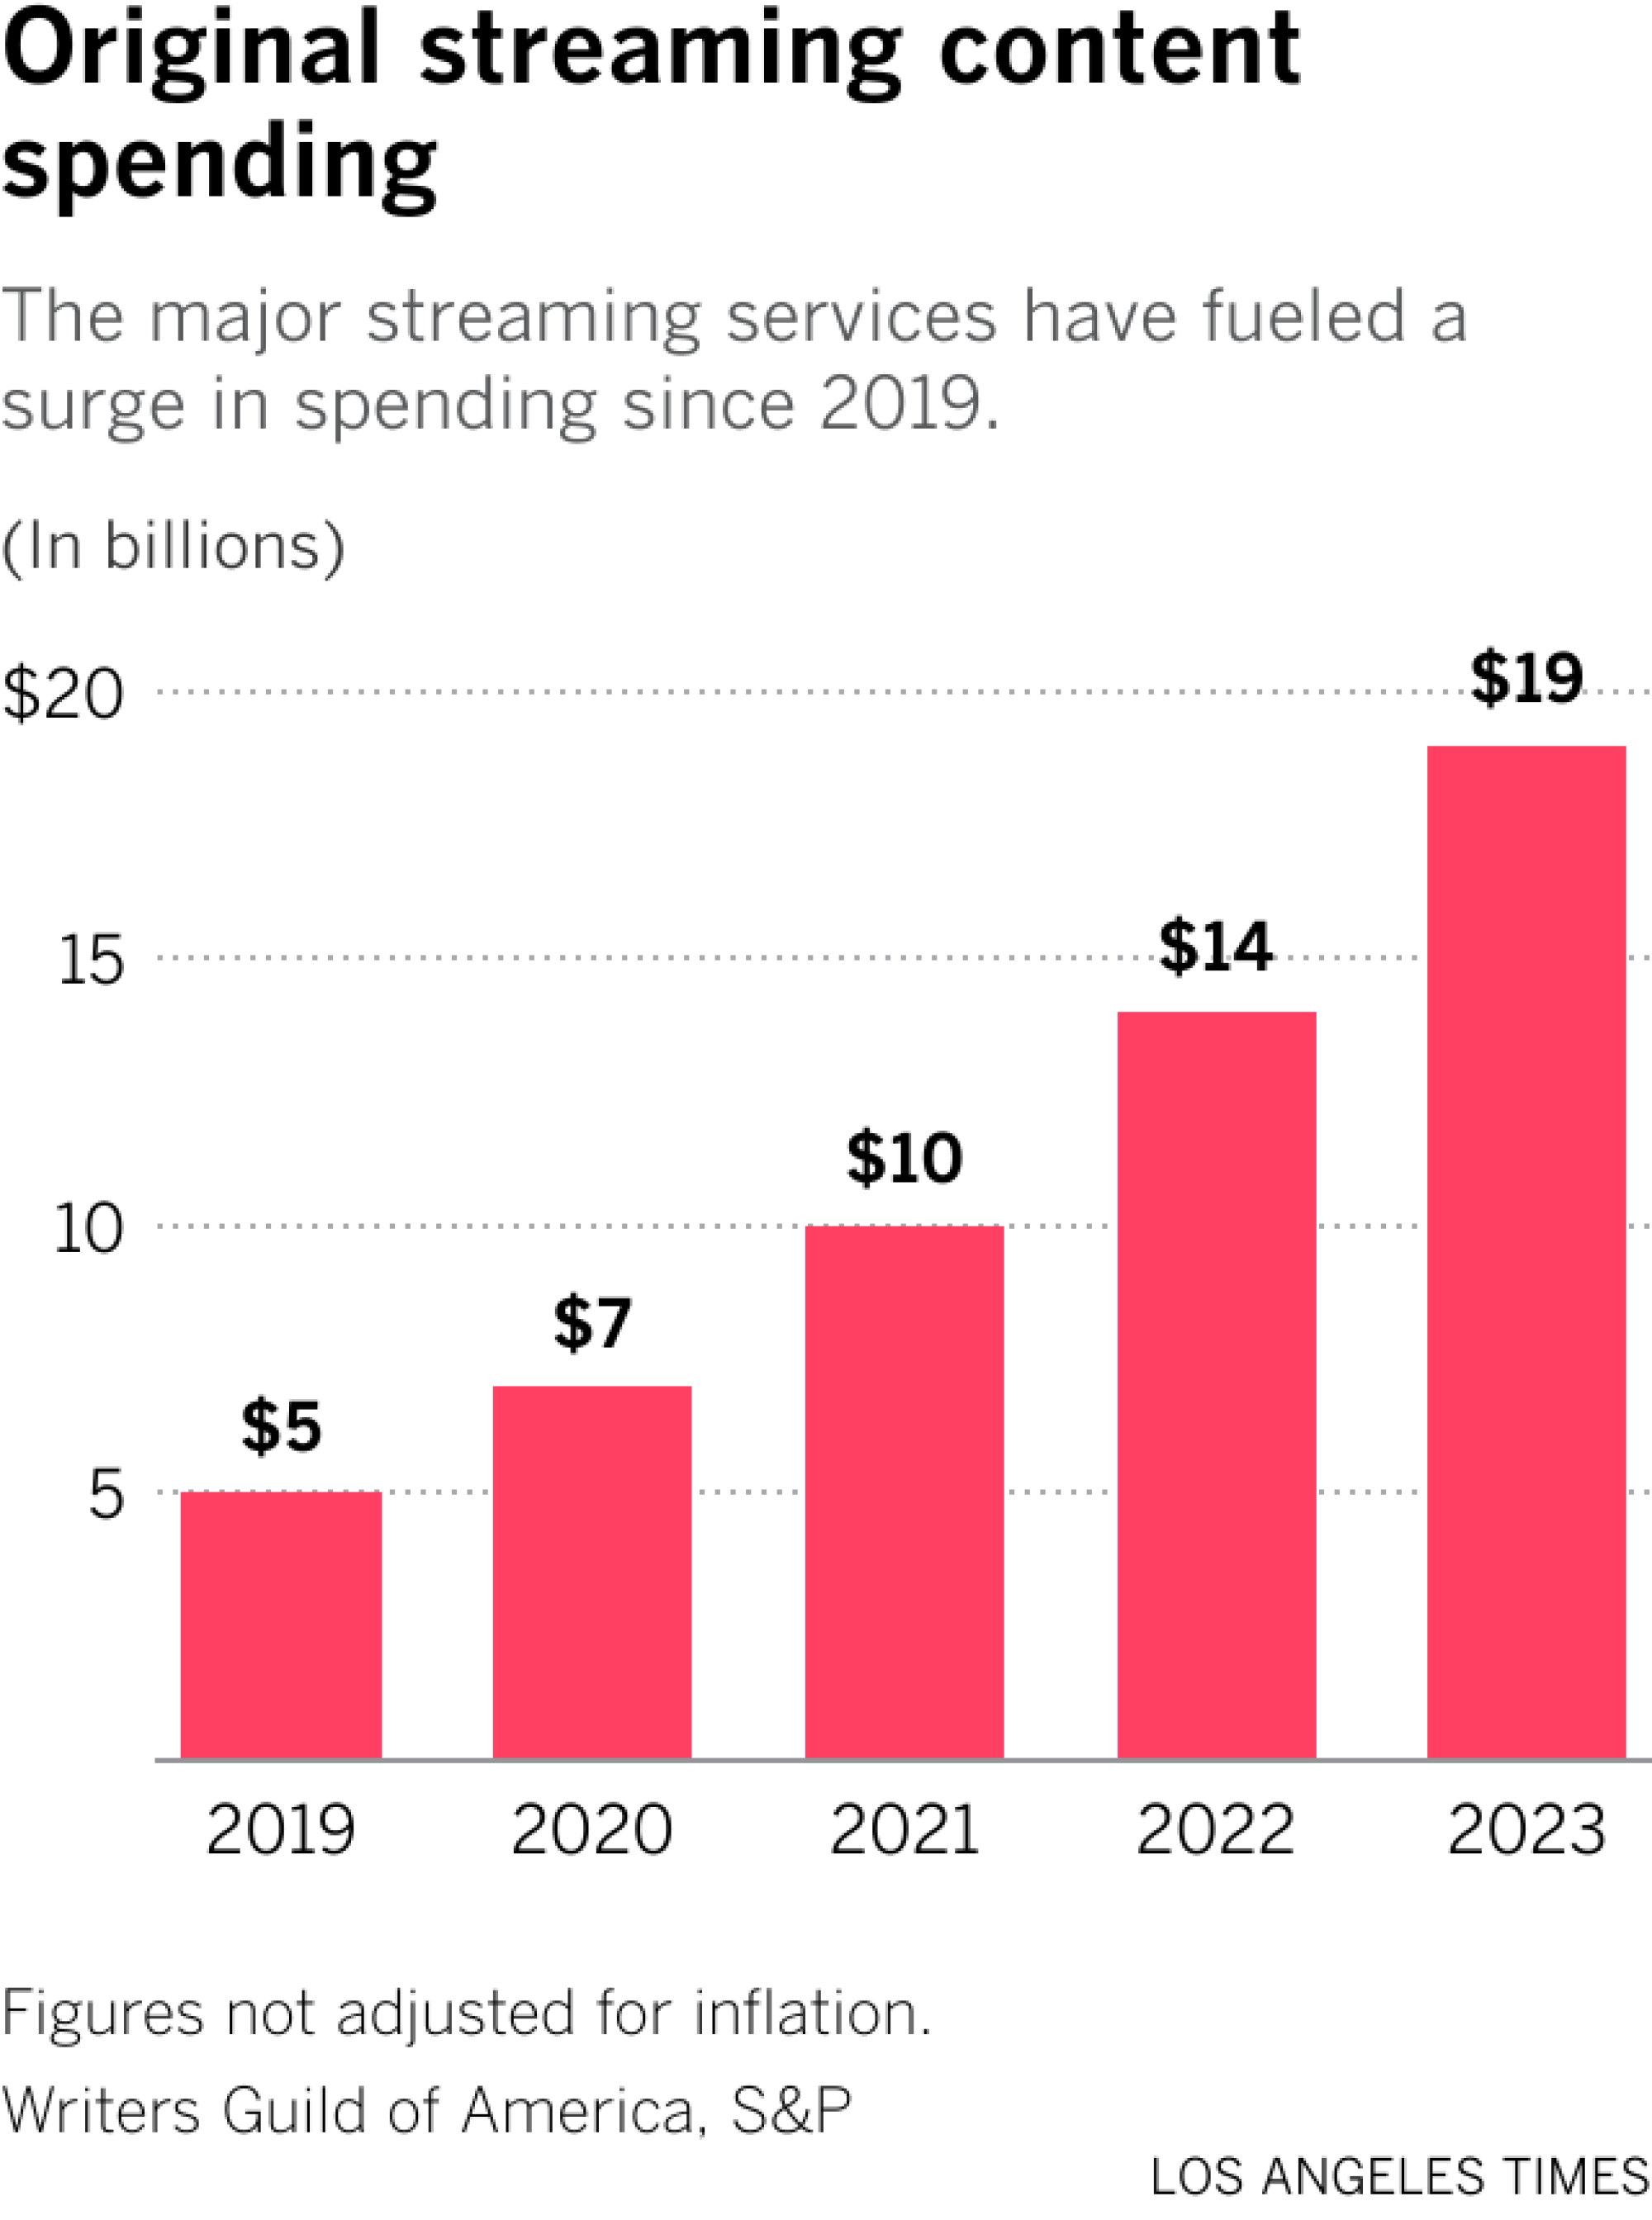 The major streaming services have fueled a surge in spending since 2019.